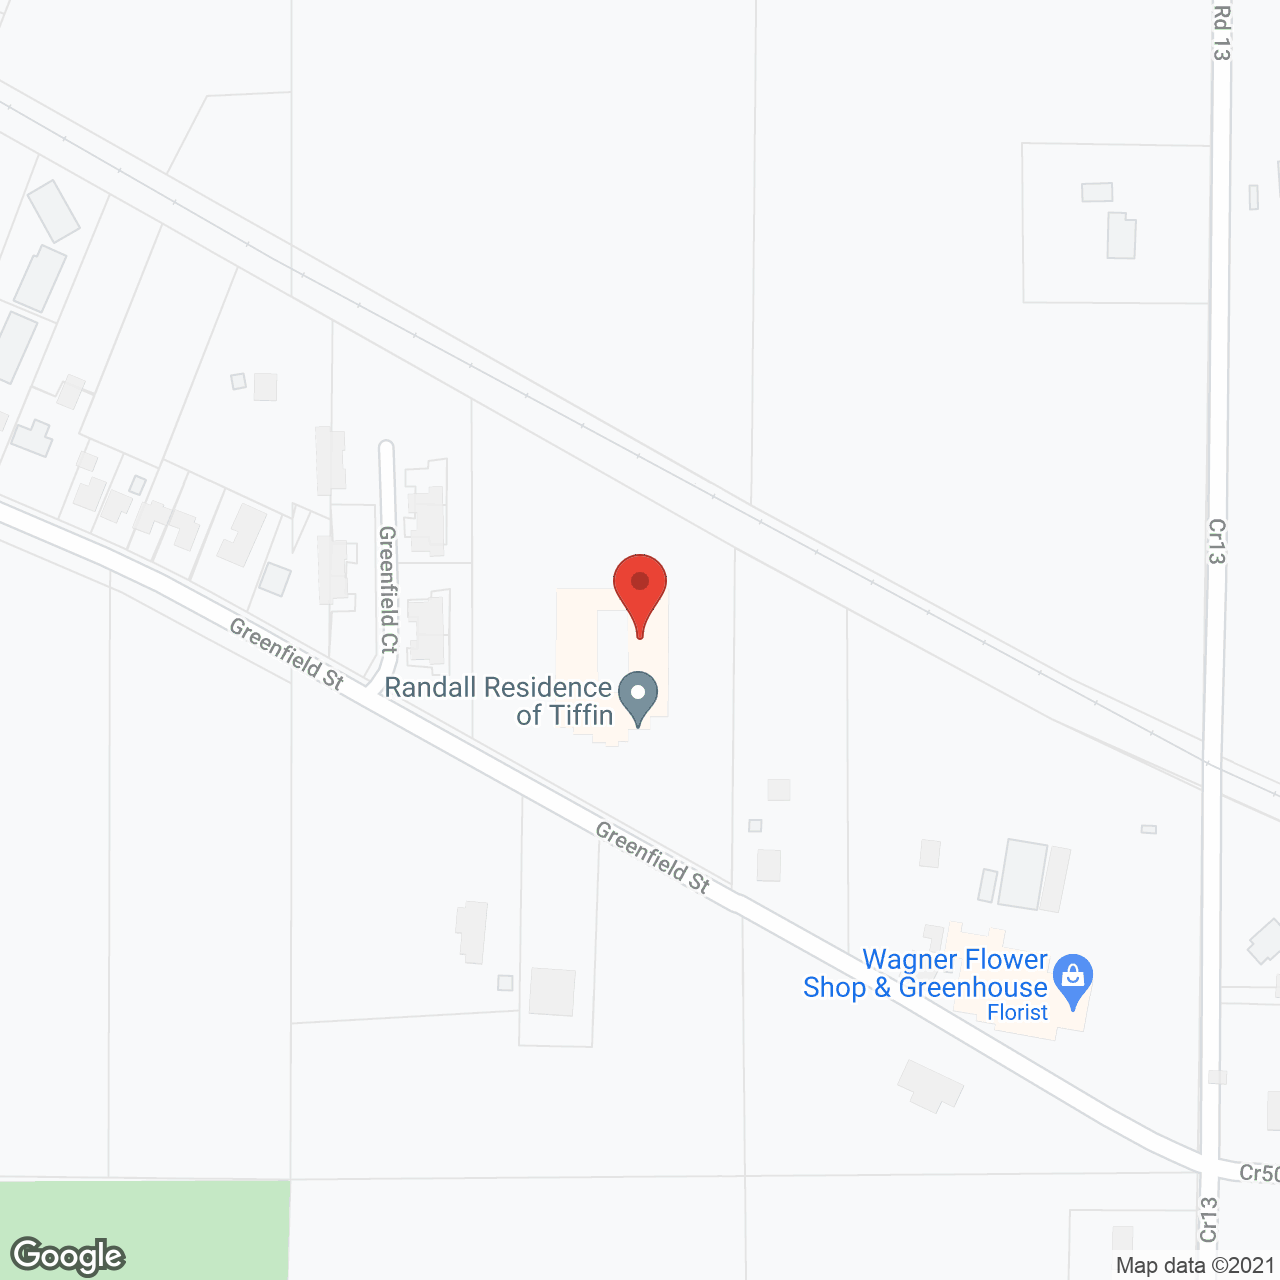 Randall Residence of Tiffin in google map